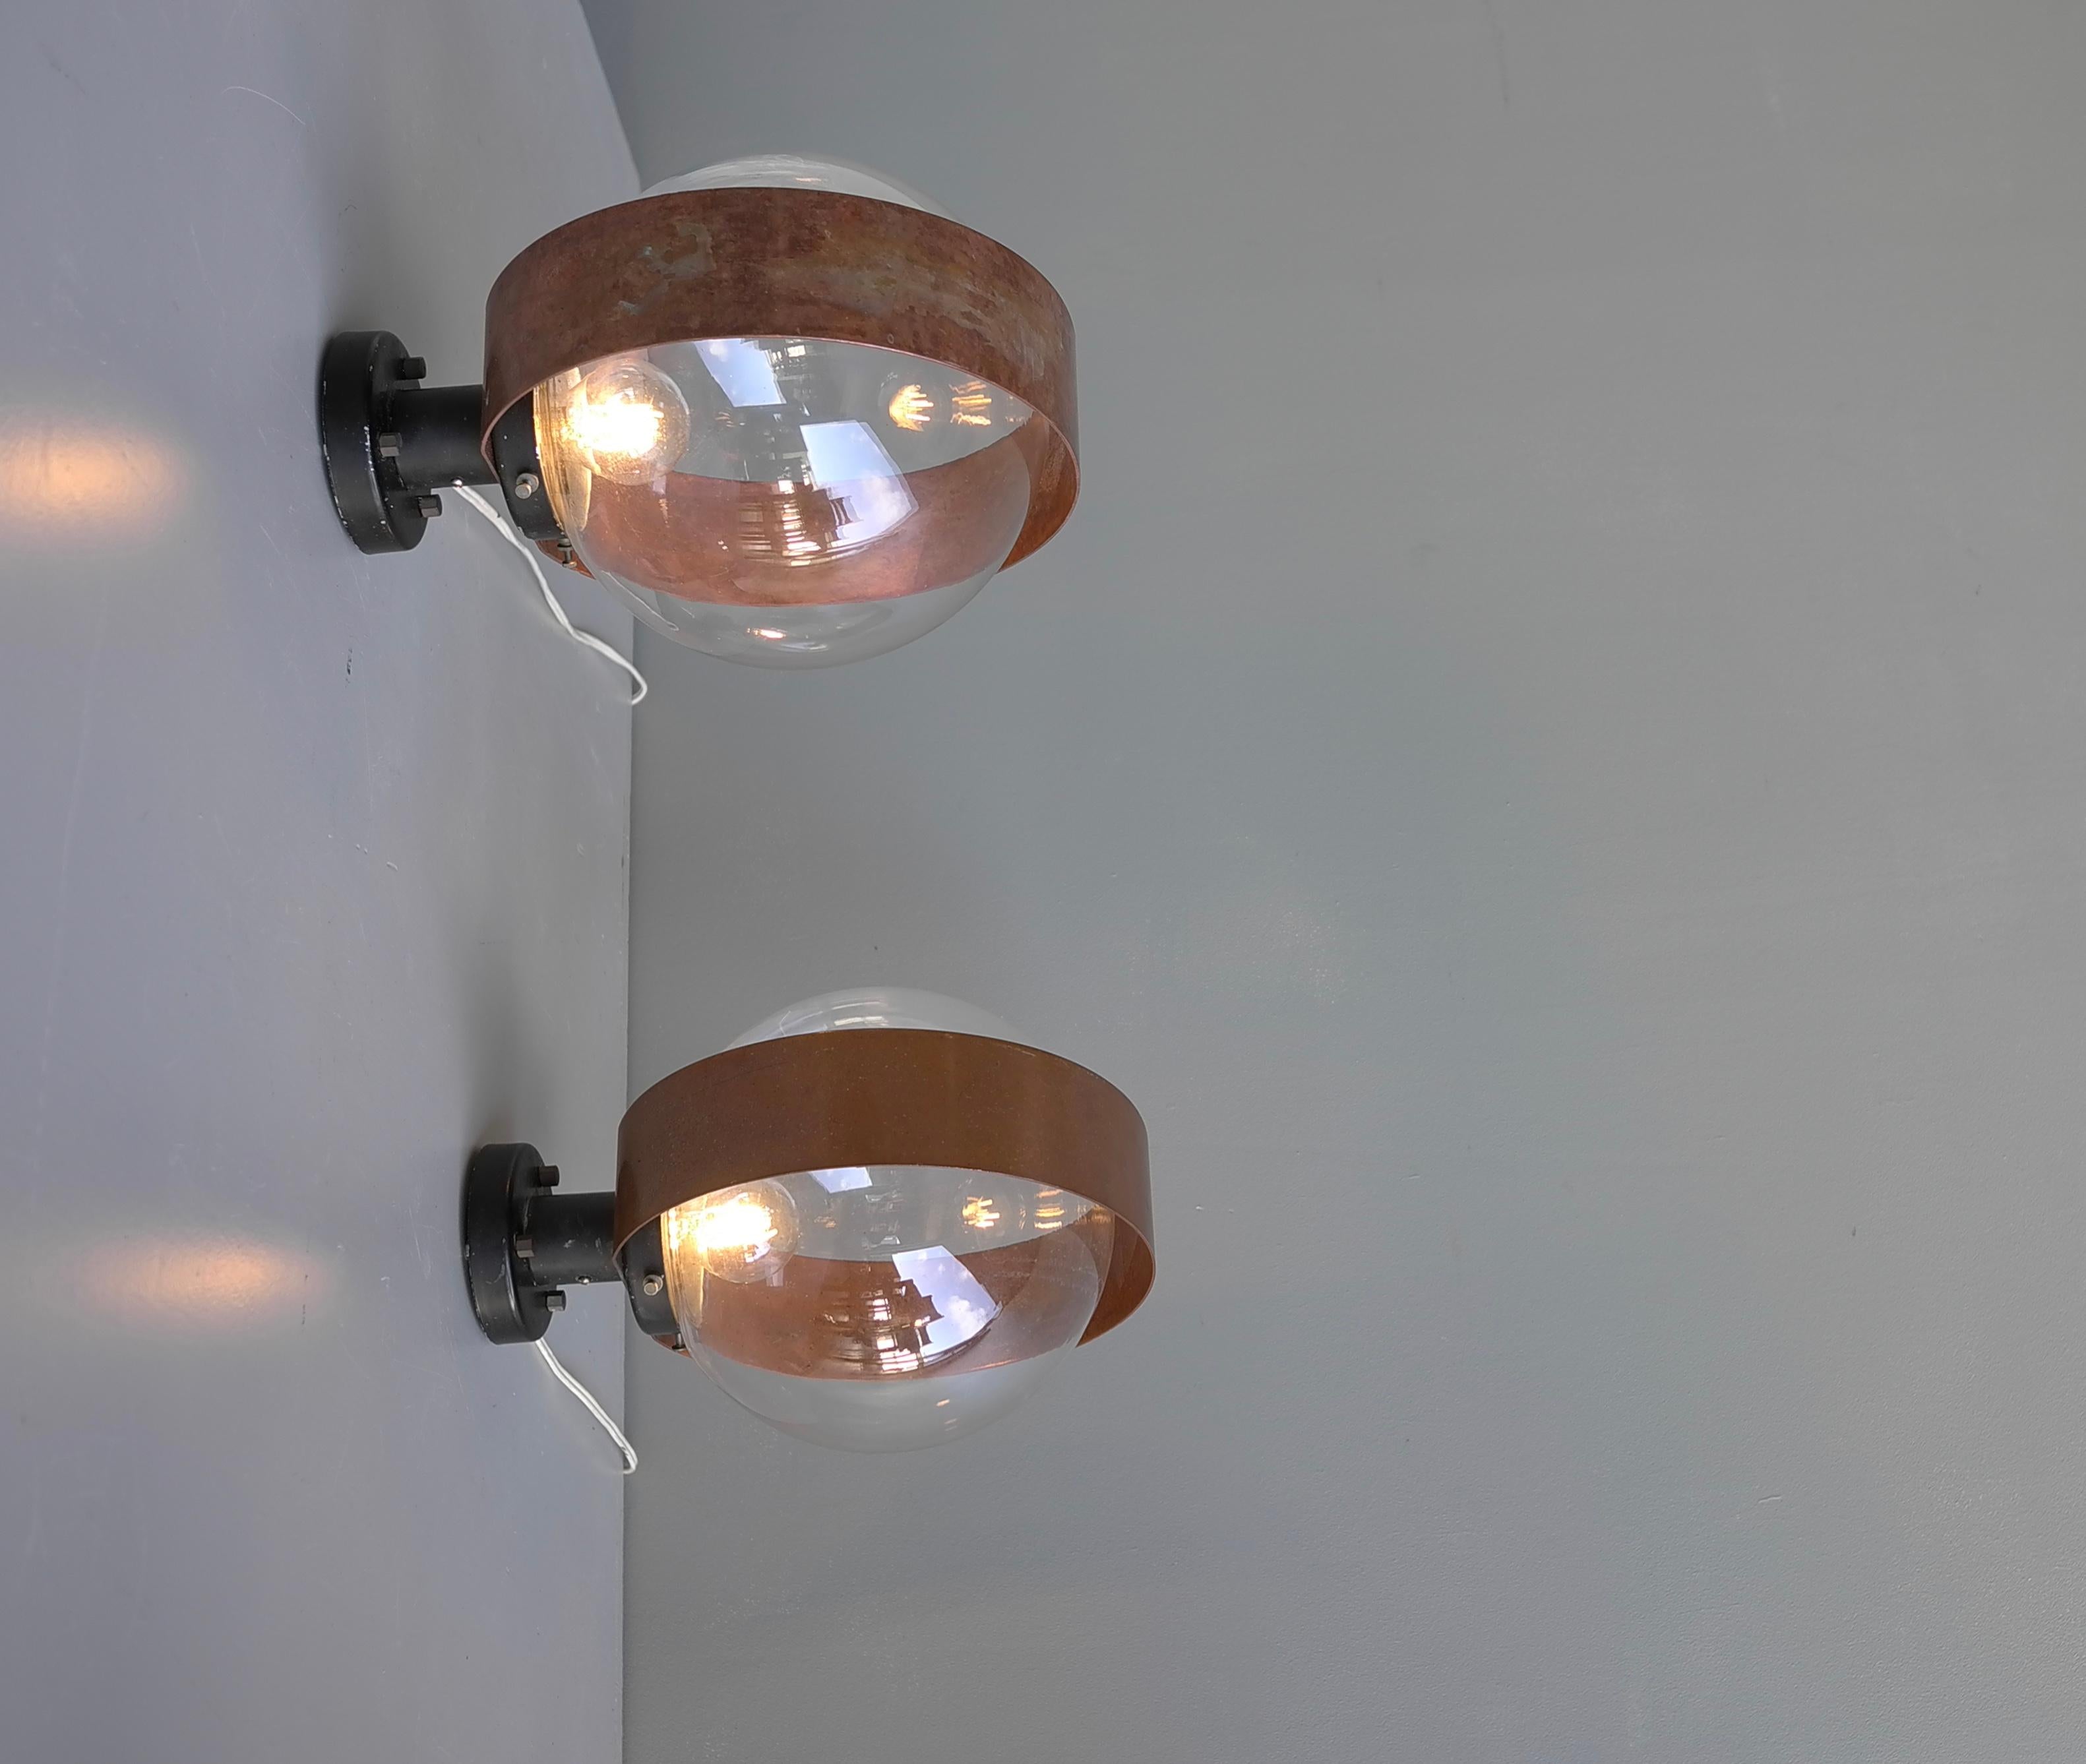 Pair of Scandinavian Glass Ball Wall lamps with Copper Patina Rims, 1960's For Sale 5